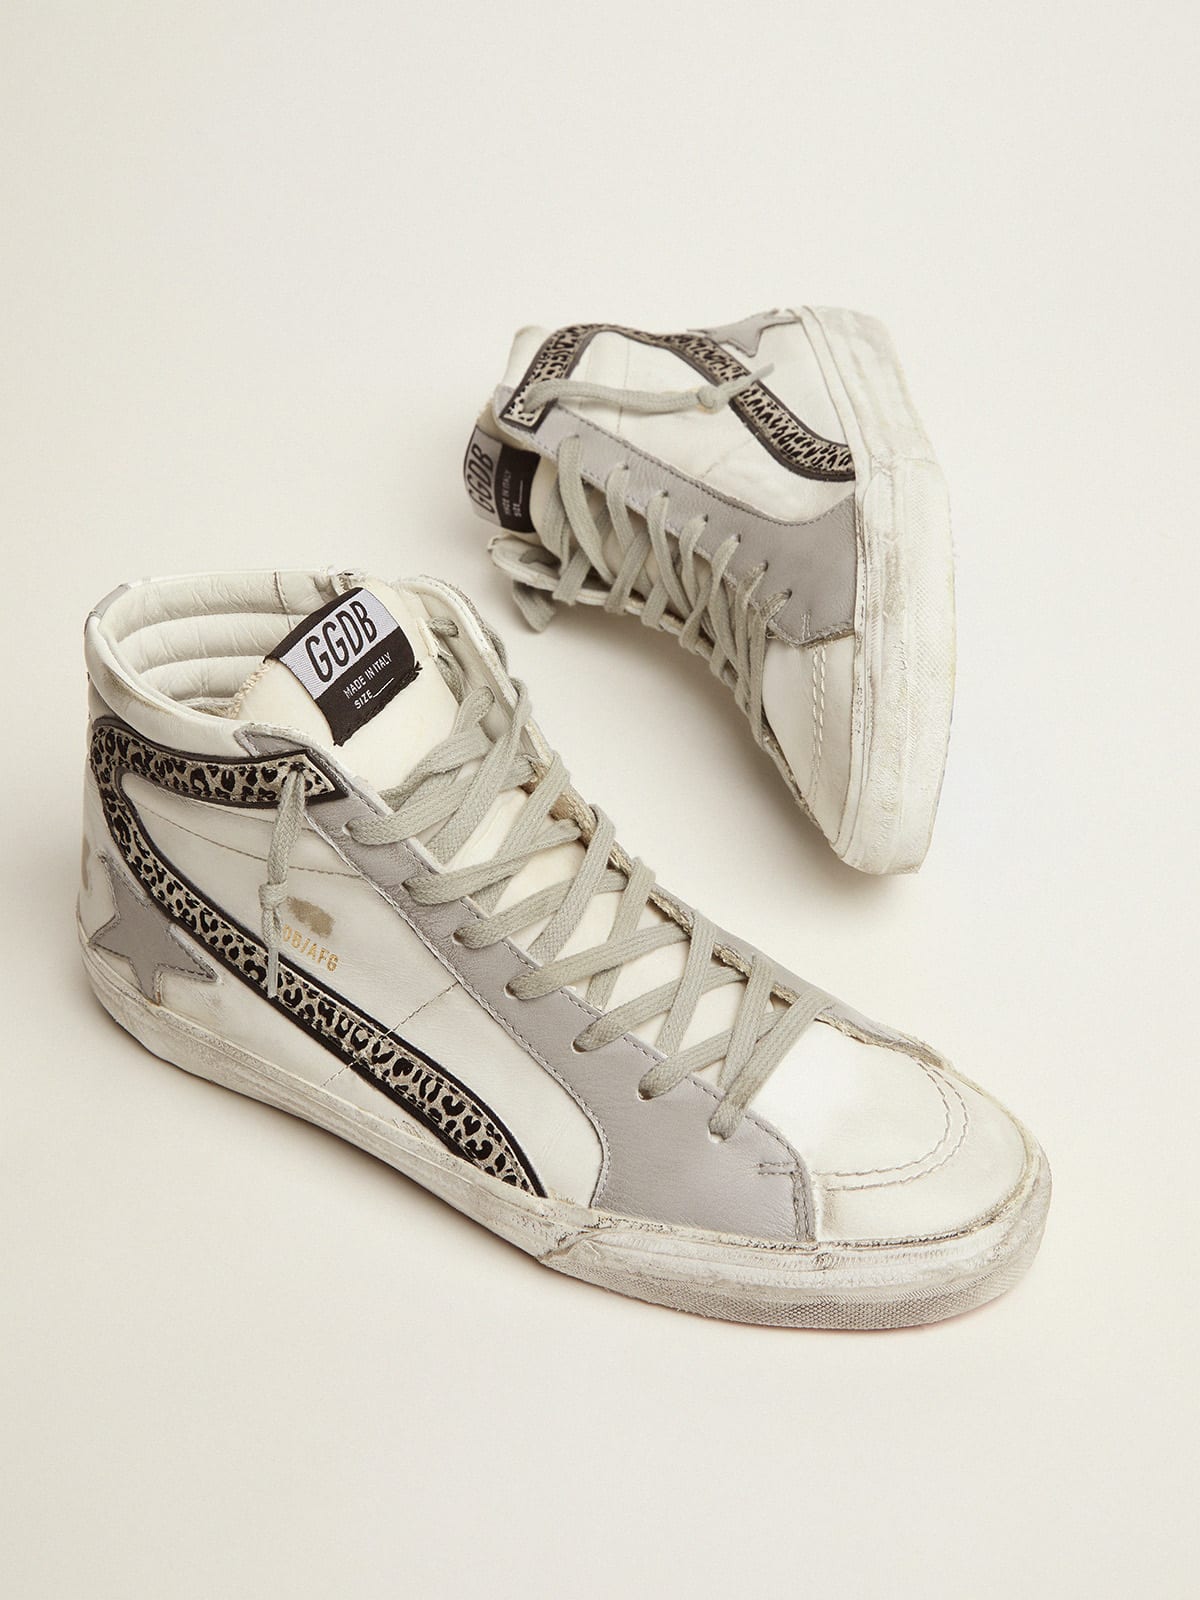 Slide sneakers with white leather upper and animal-print suede 